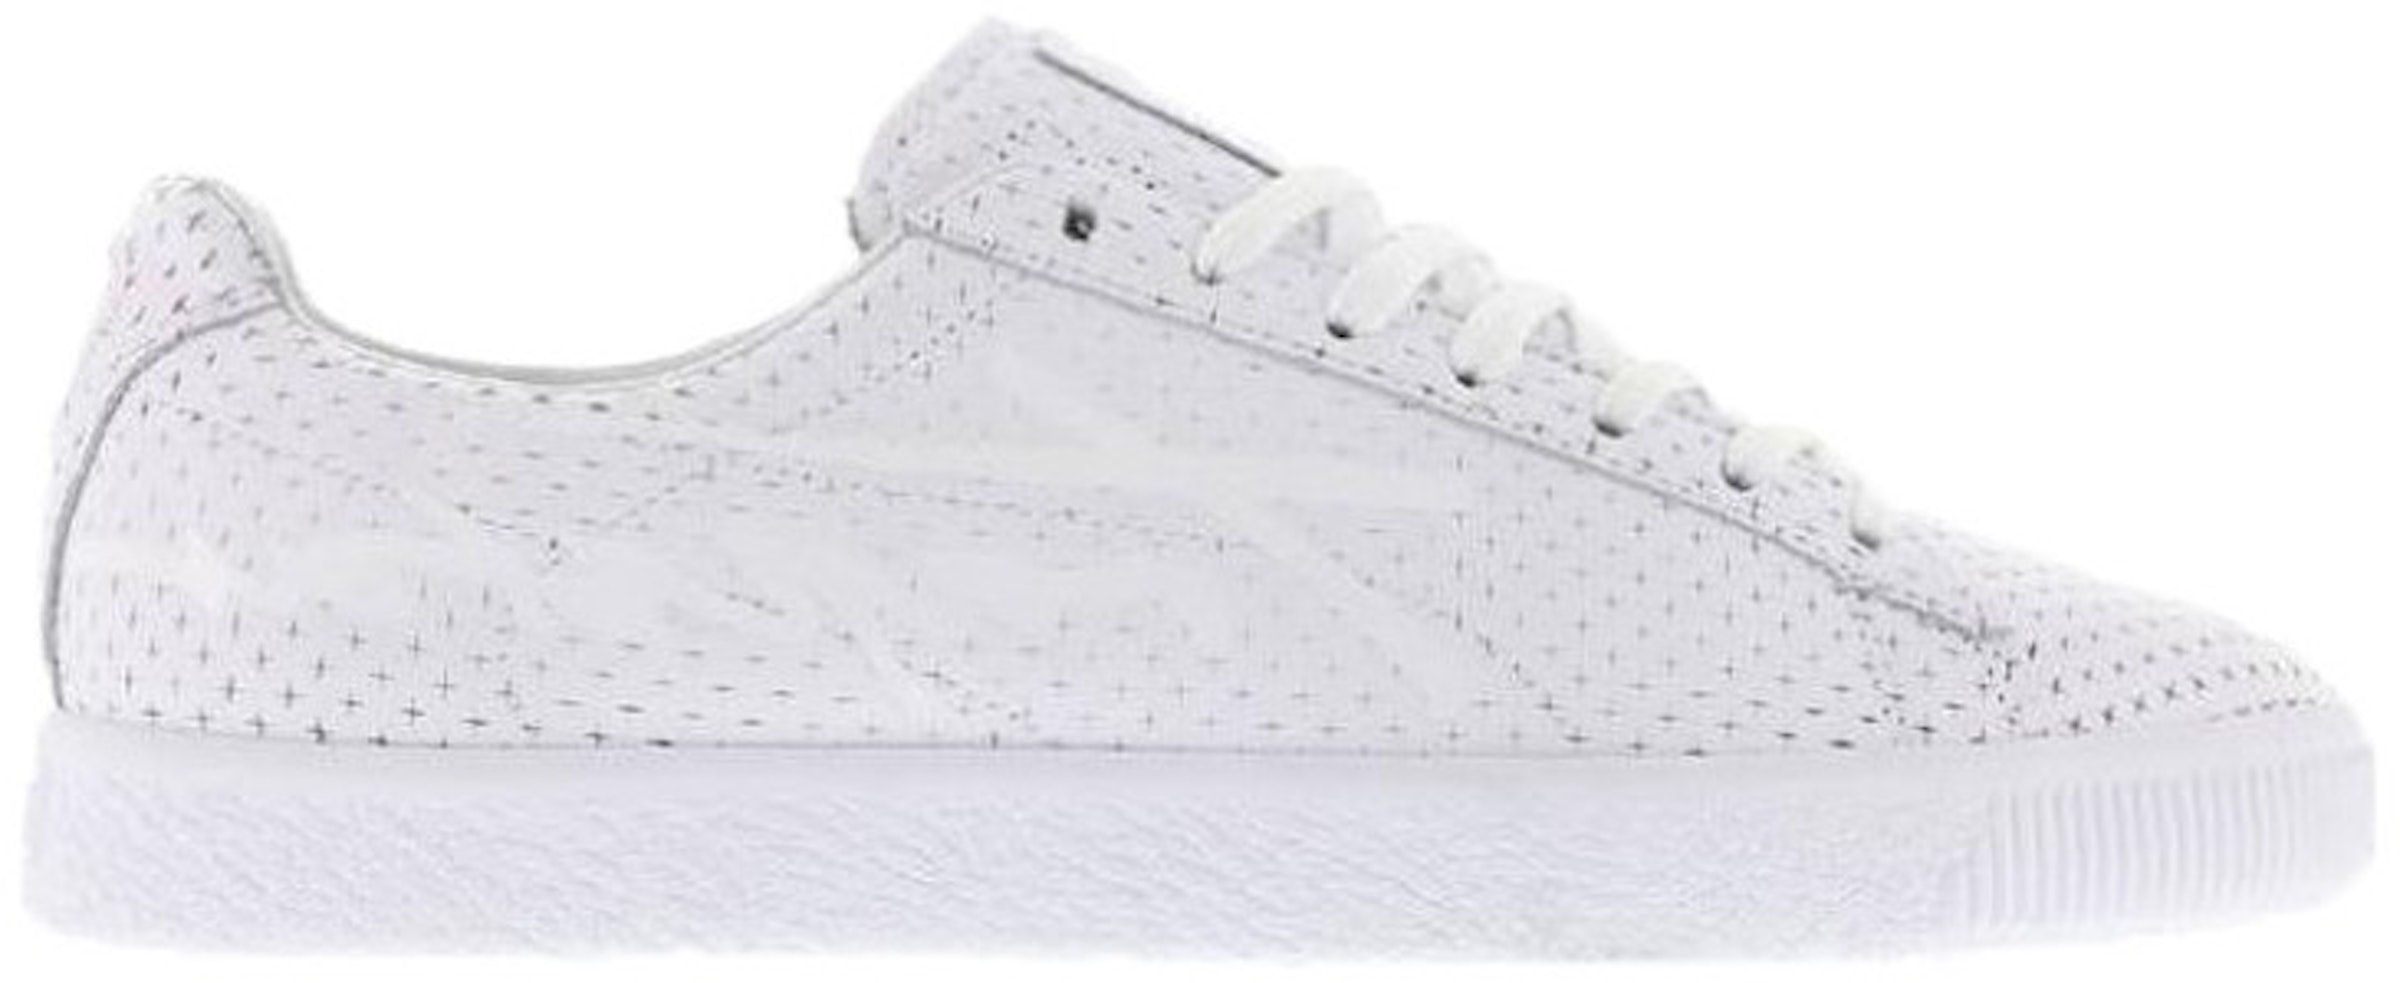 Permanent ontslaan lont Puma Clyde Perforated Trapstar White Men's - 364714-03 - US